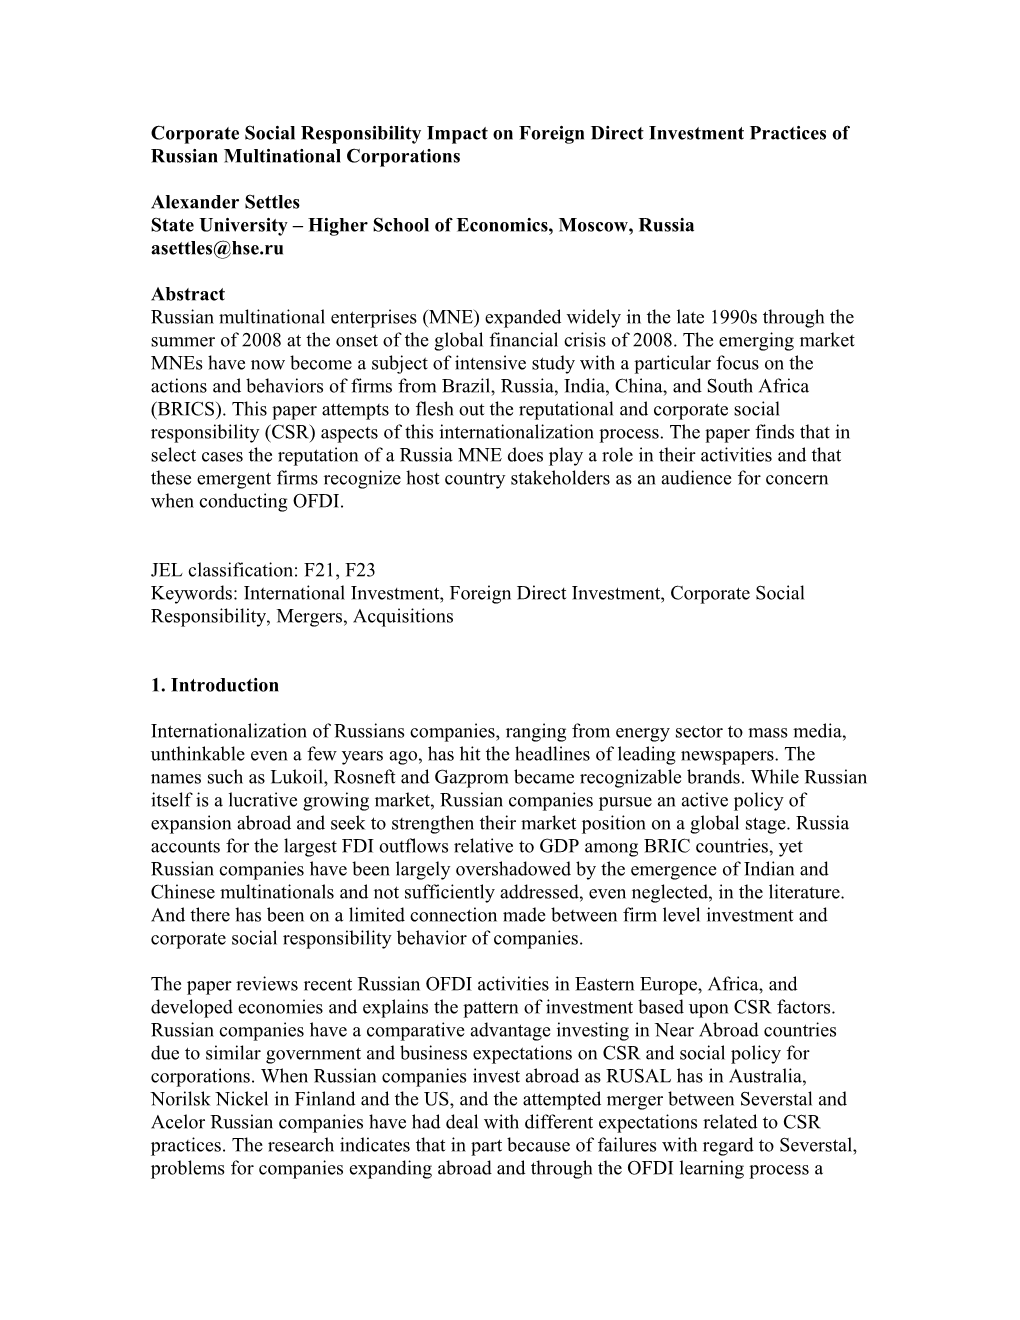 Corporate Social Responsibility Impact on Foreign Direct Investment Practices of Russian